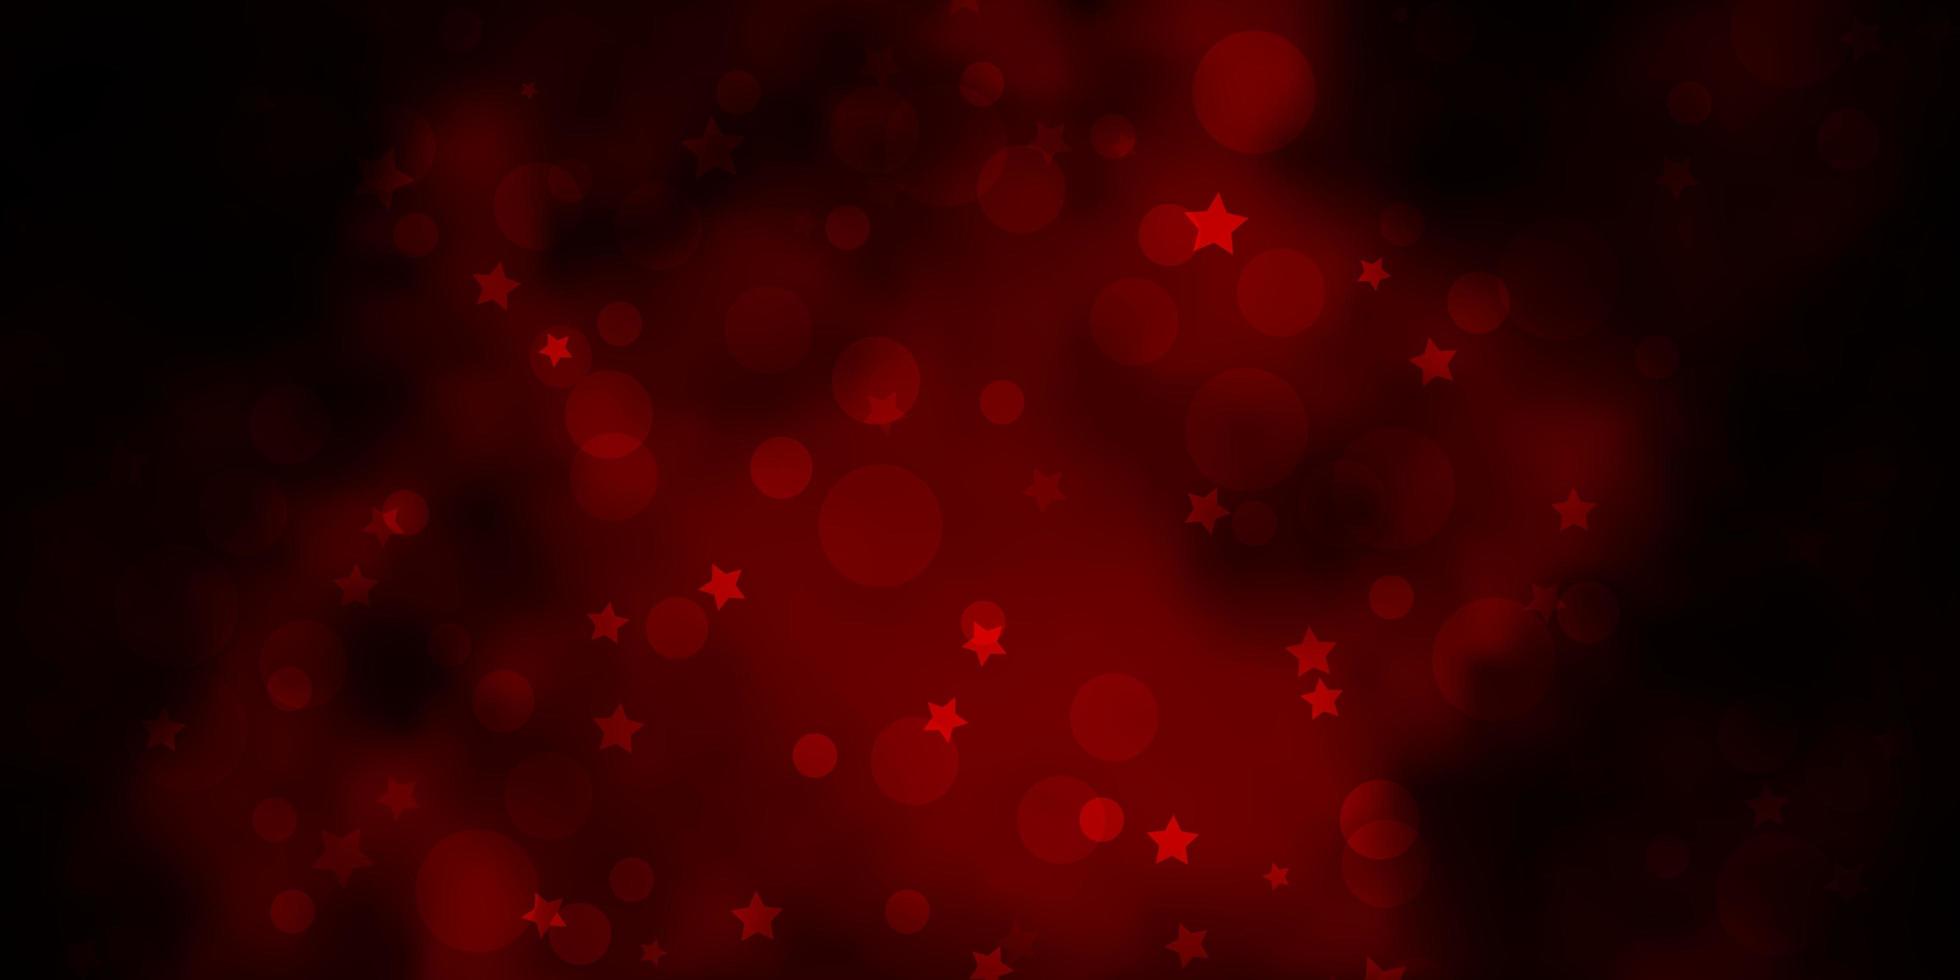 Dark Red vector layout with circles stars Abstract design in gradient style with bubbles stars Texture for window blinds curtains